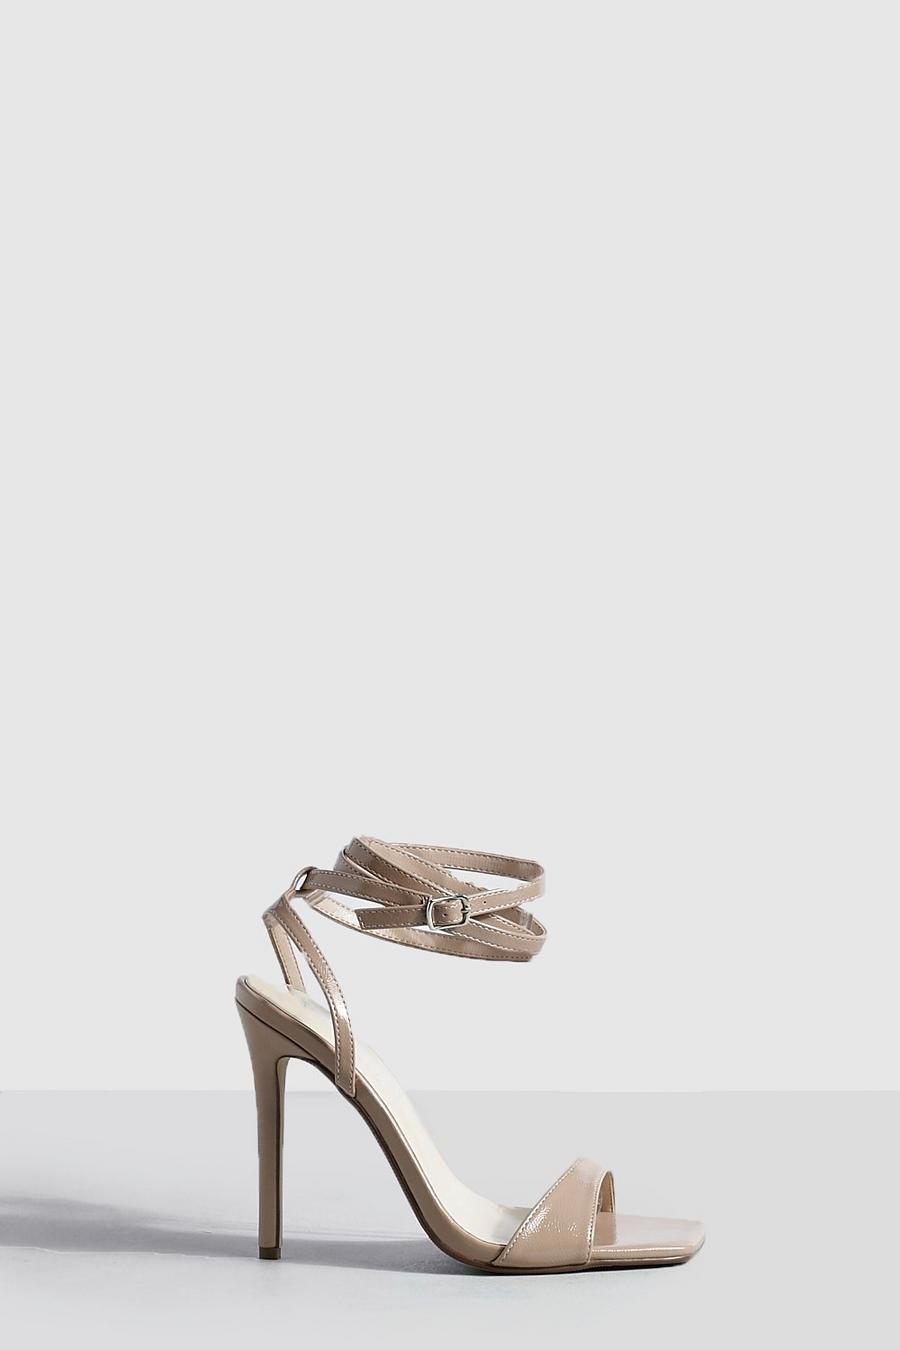 Taupe Wide Width Strappy Ankle Barely There Stiletto Heel